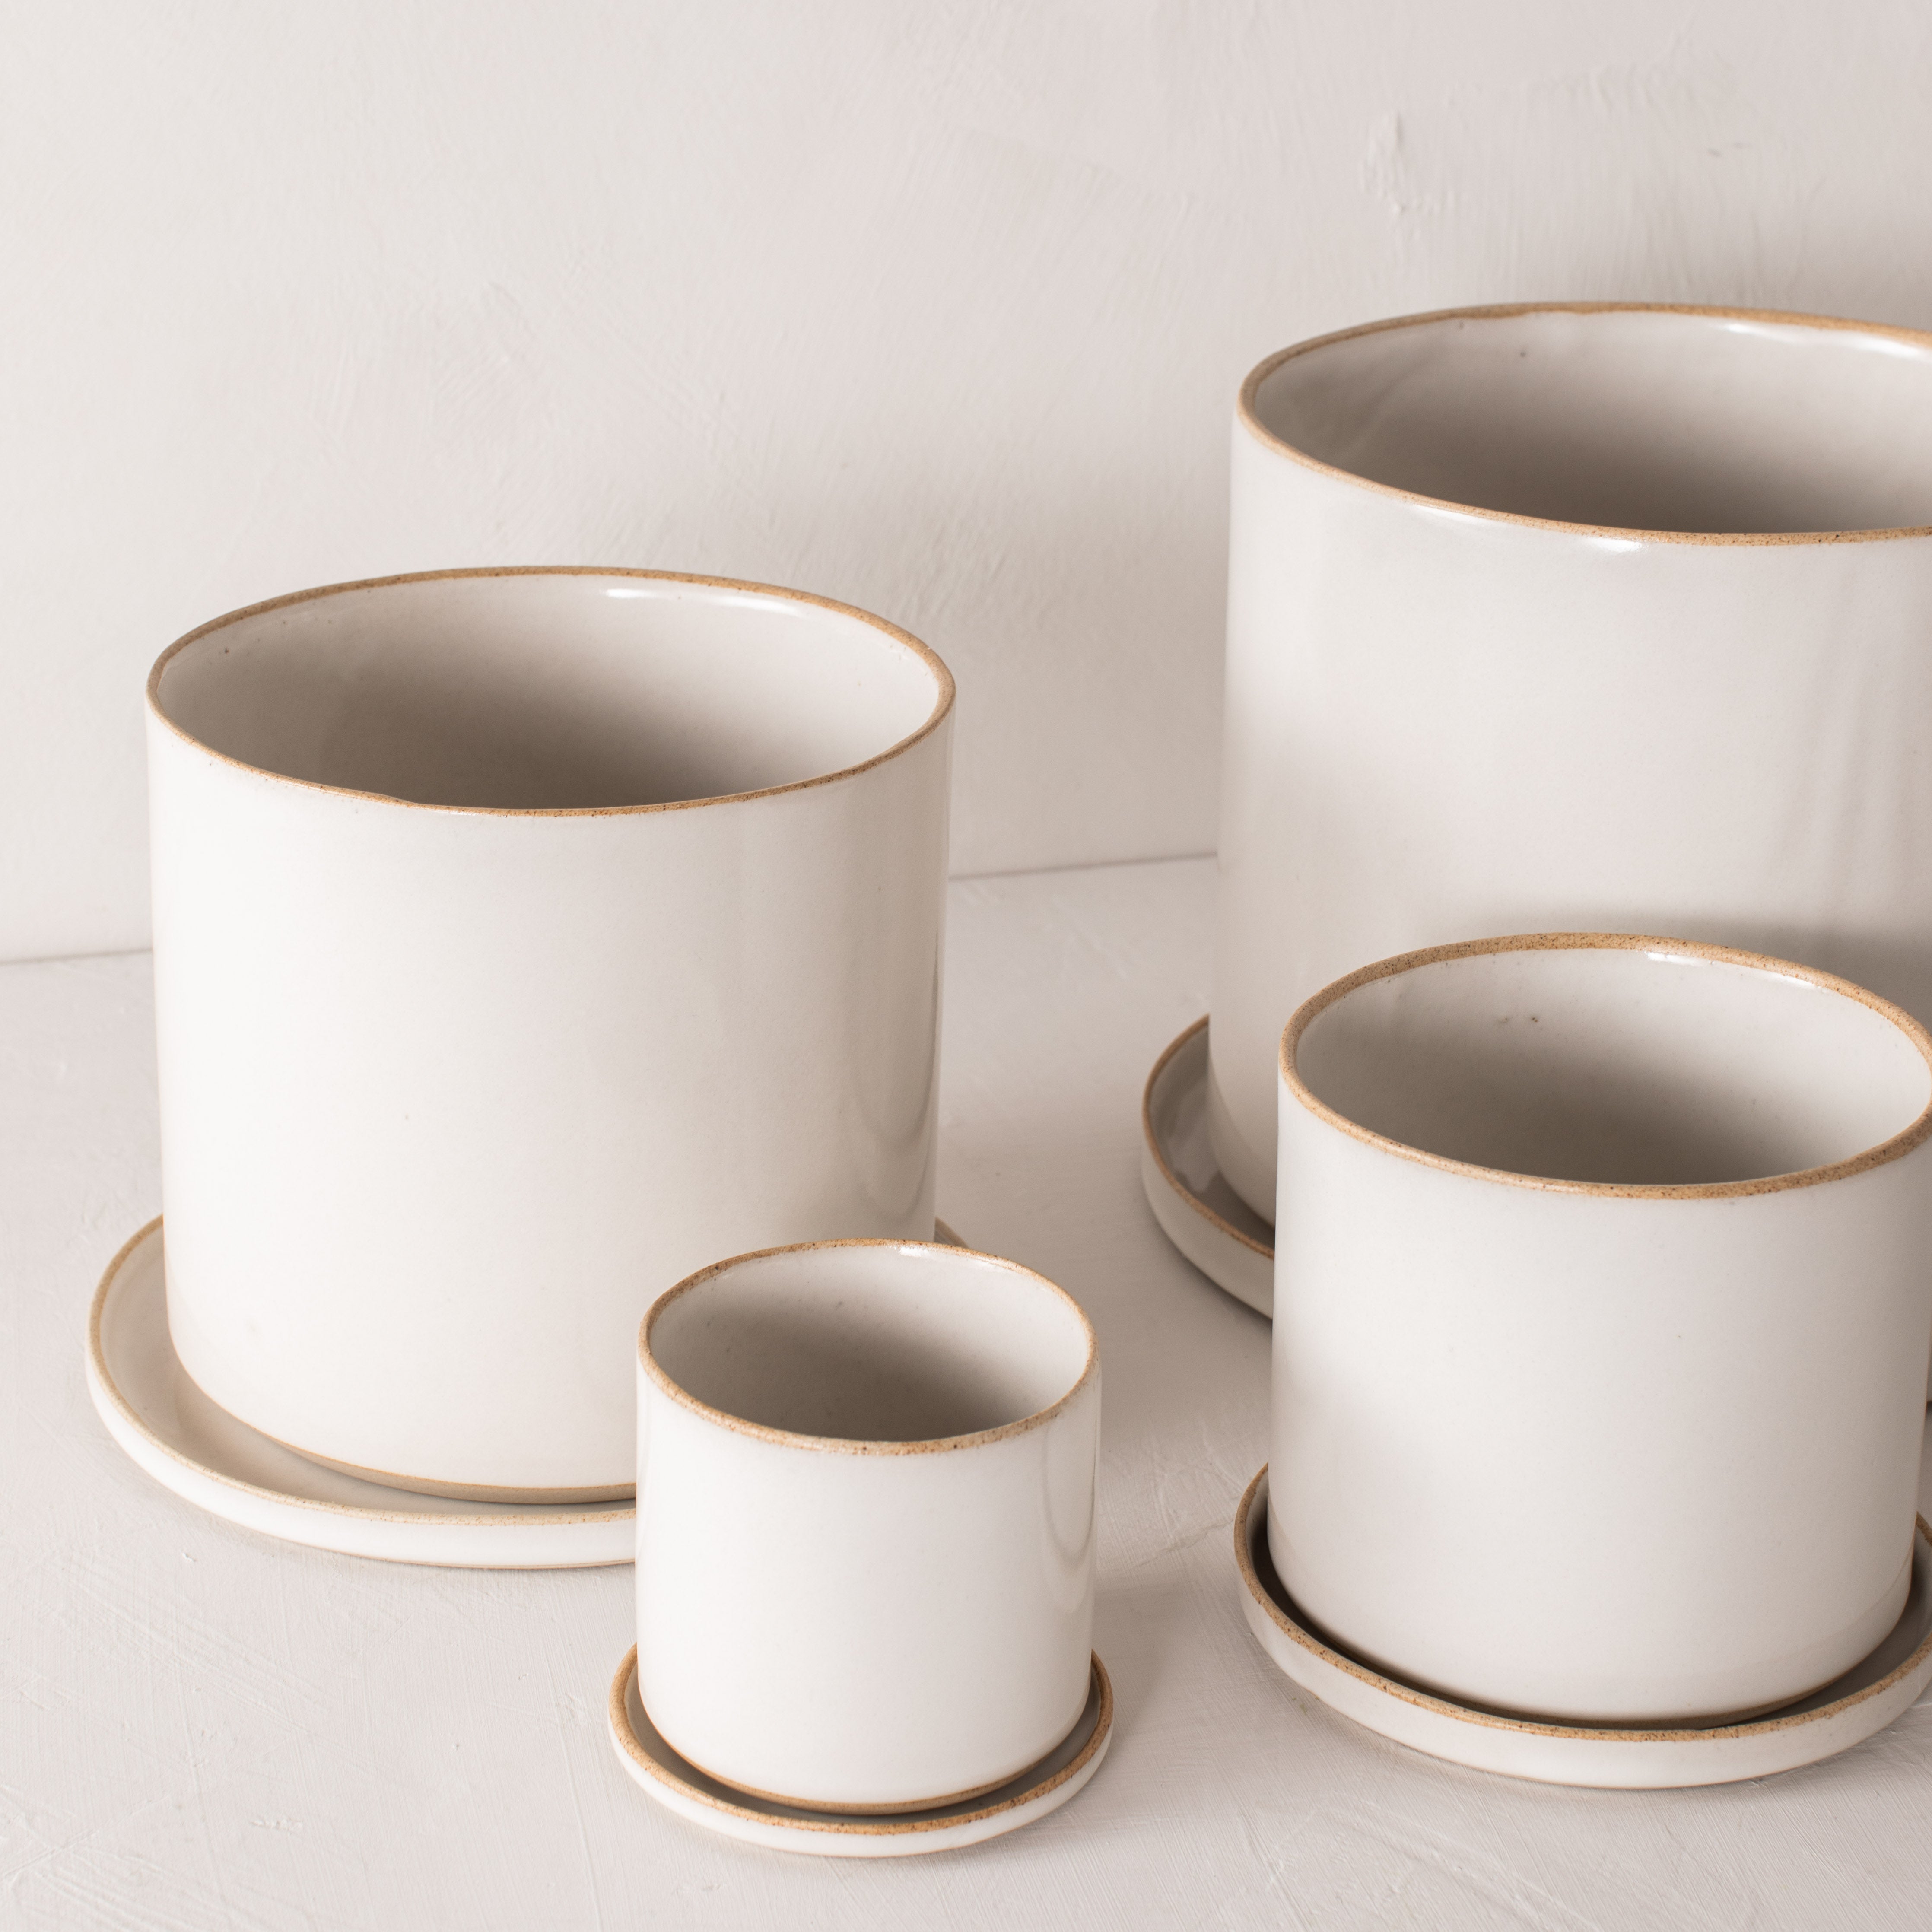 Group of four minimal white planters, 4, 6, 8, and 10 inch. Designed and sold by Convivial Production, Kansas City ceramics. 